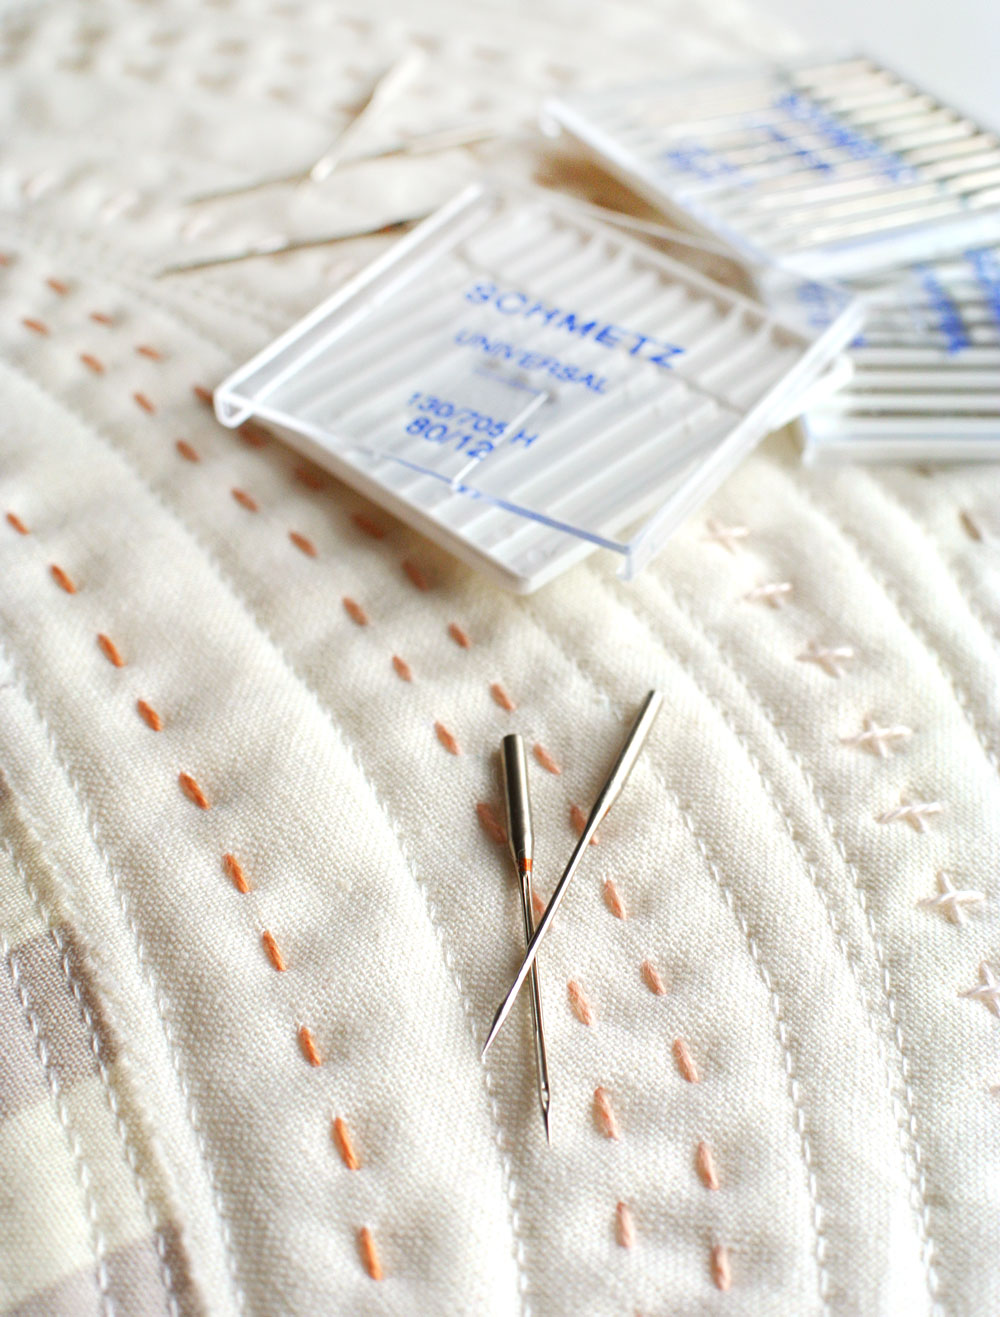 The Truth about Universal Needles... are They Really Universal? All you need to know about Universal Sewing Needles | Suzy Quilts https://suzyquilts.com/universal-needles